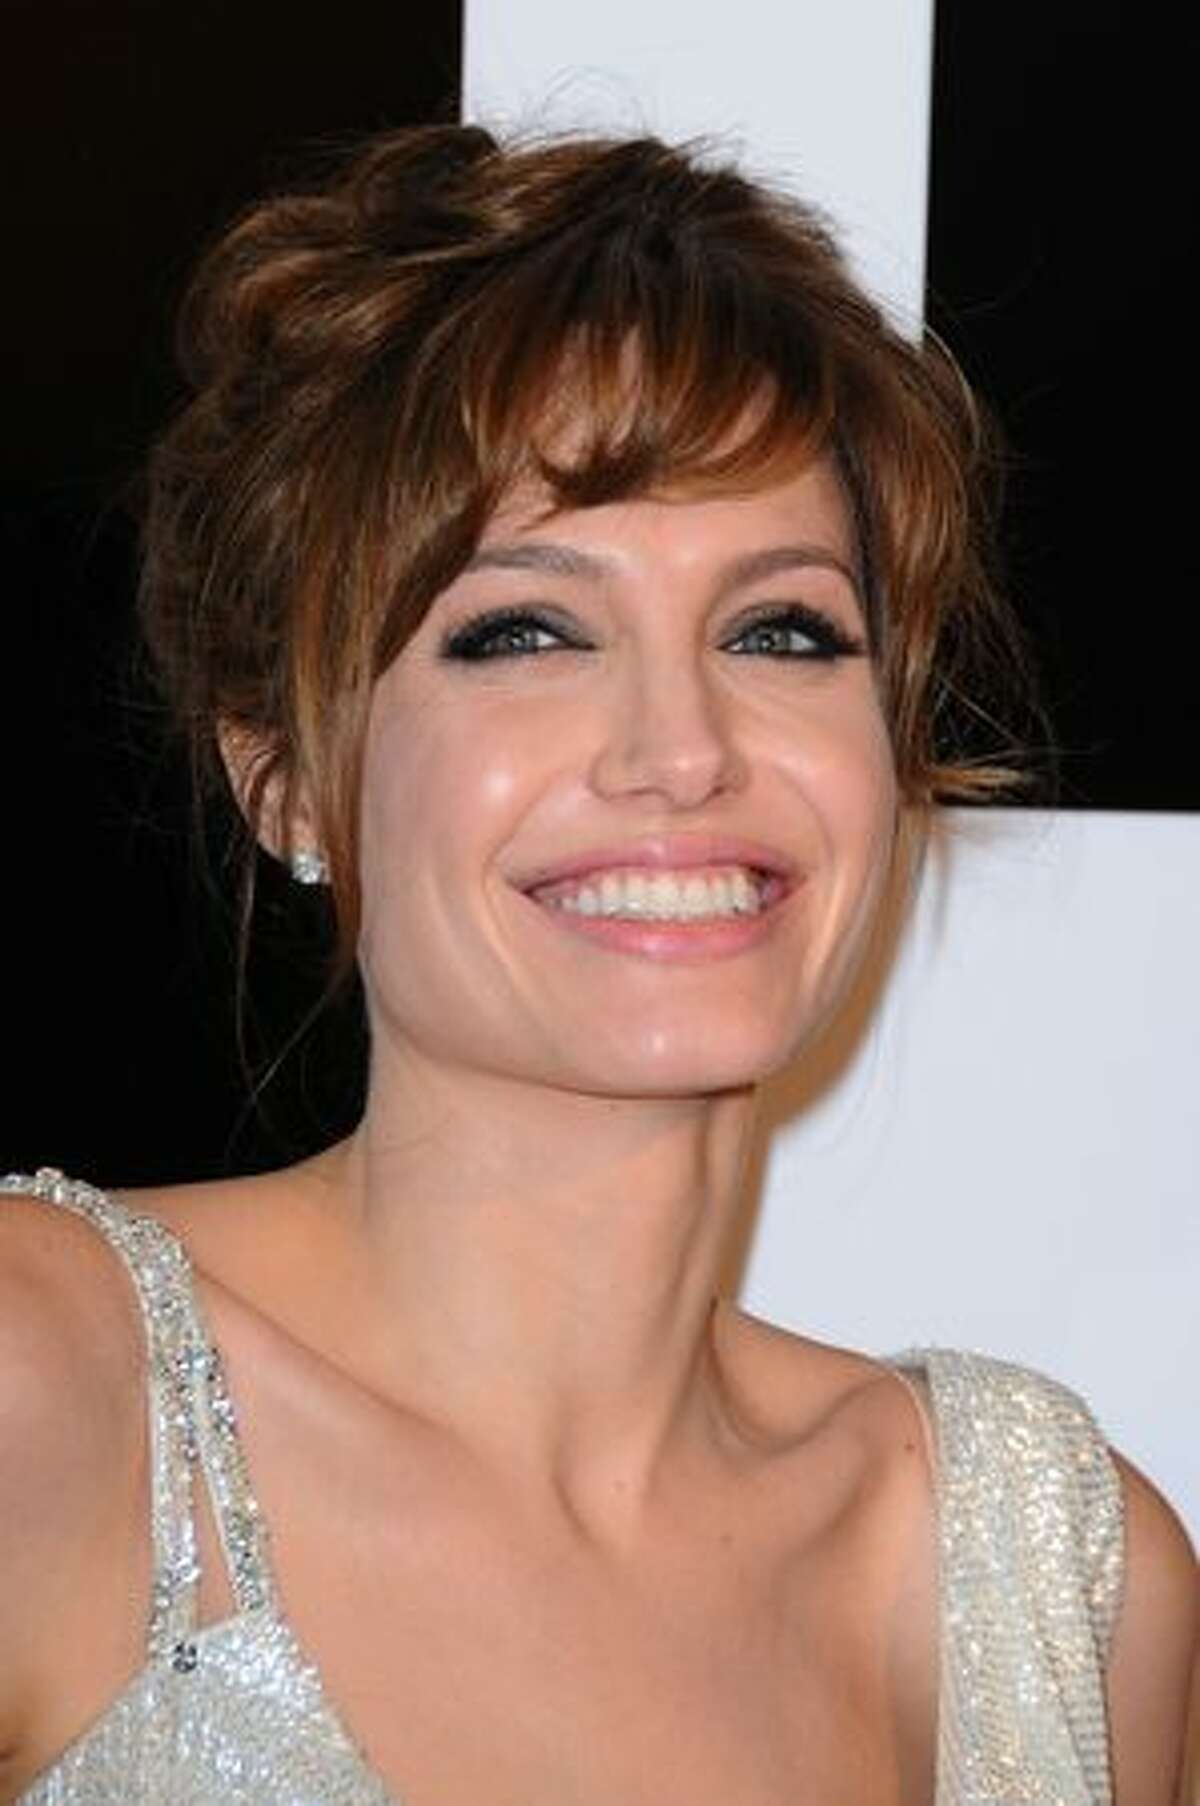 Actress Angelina Jolie poses as she attends the premiere for "Salt" at Le Grand Rex in Paris, France.